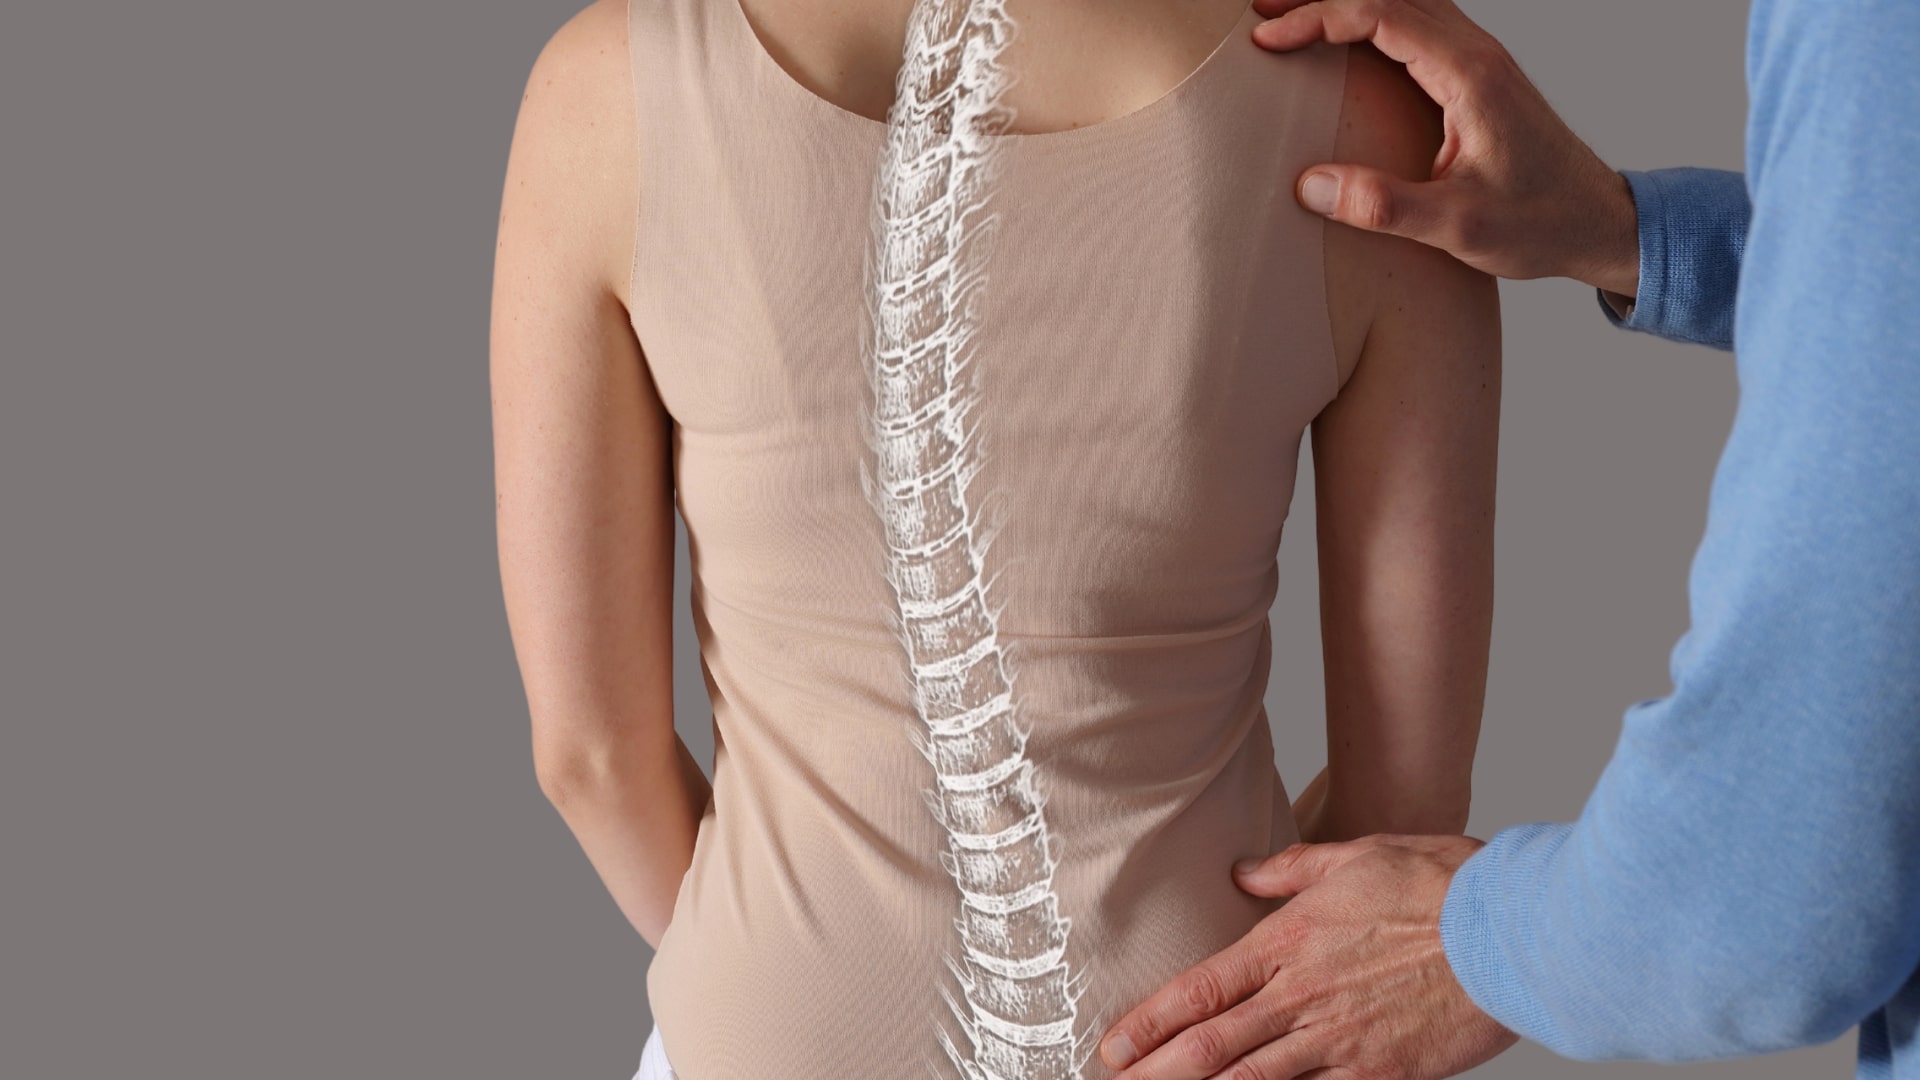 Photo illustration of a doctor examining a woman's spine.